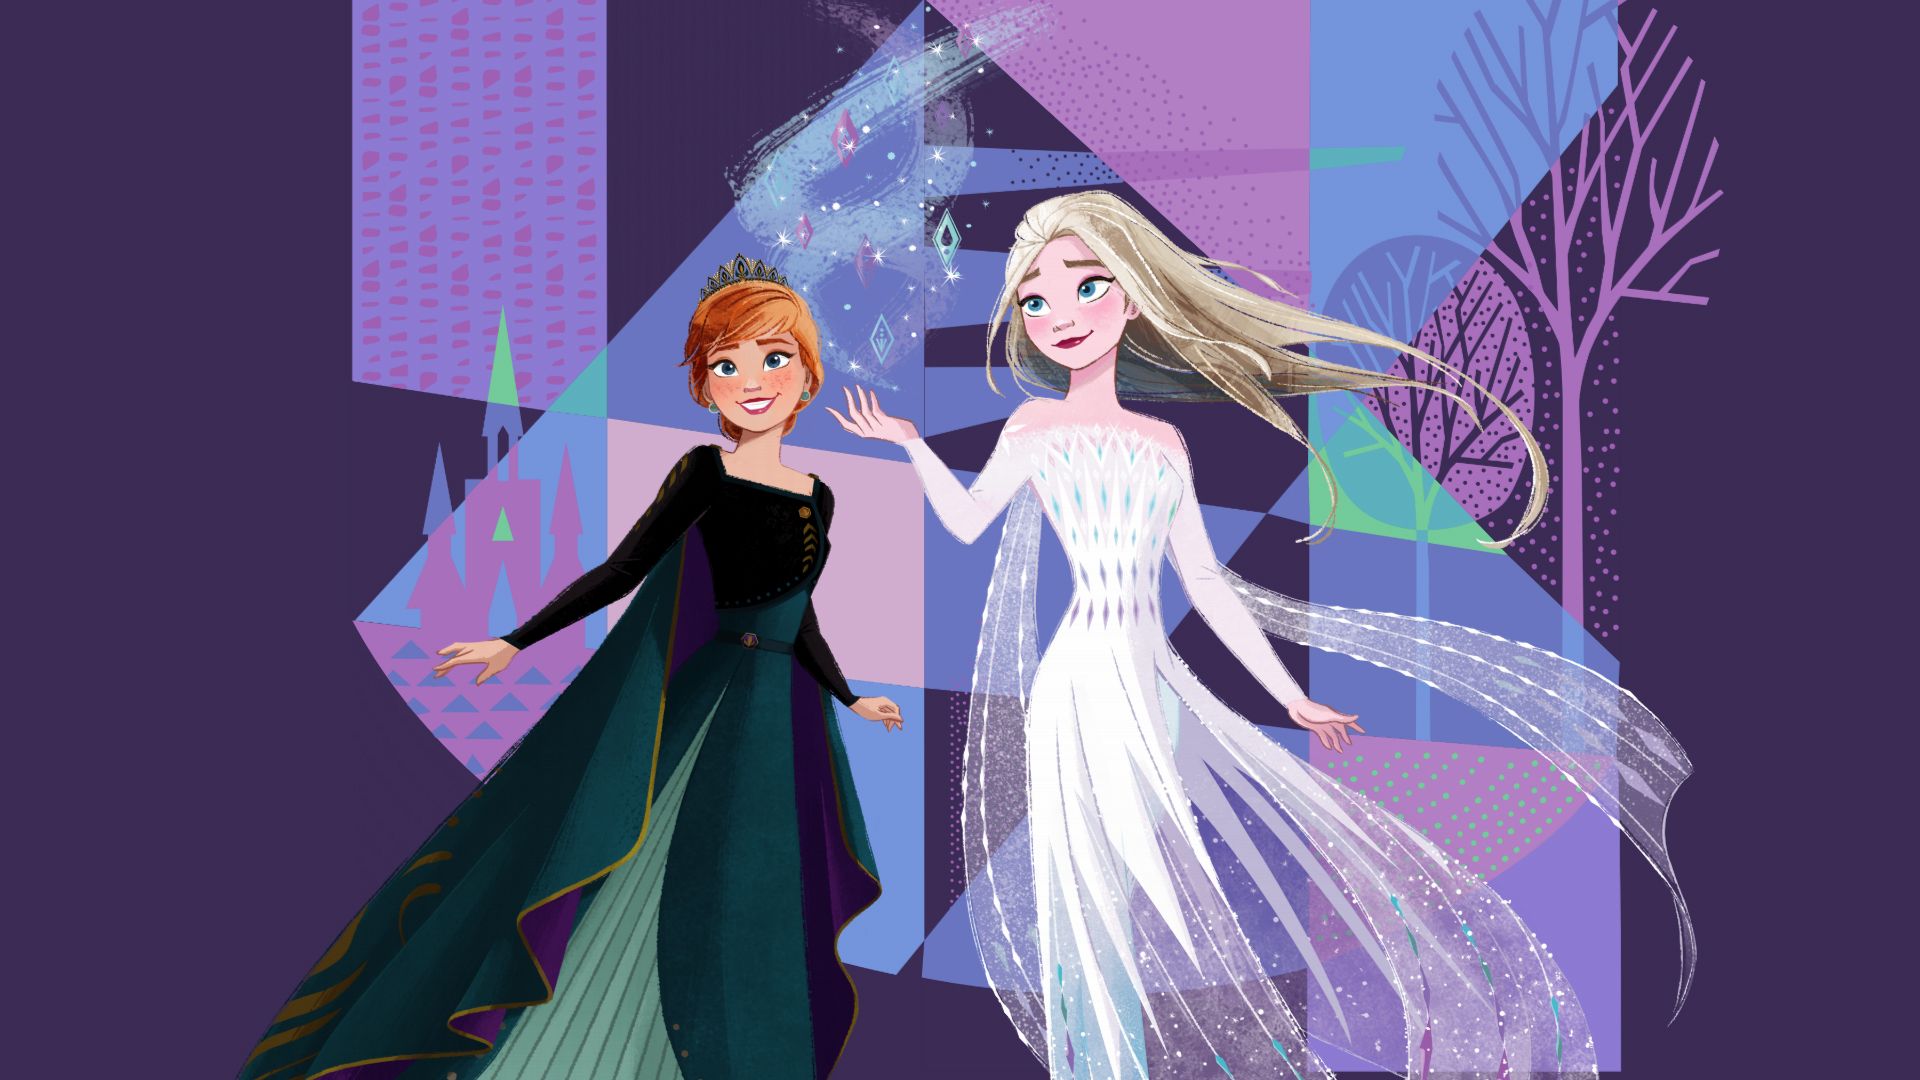 new Frozen 2 HD wallpaper with Elsa in white dress and her